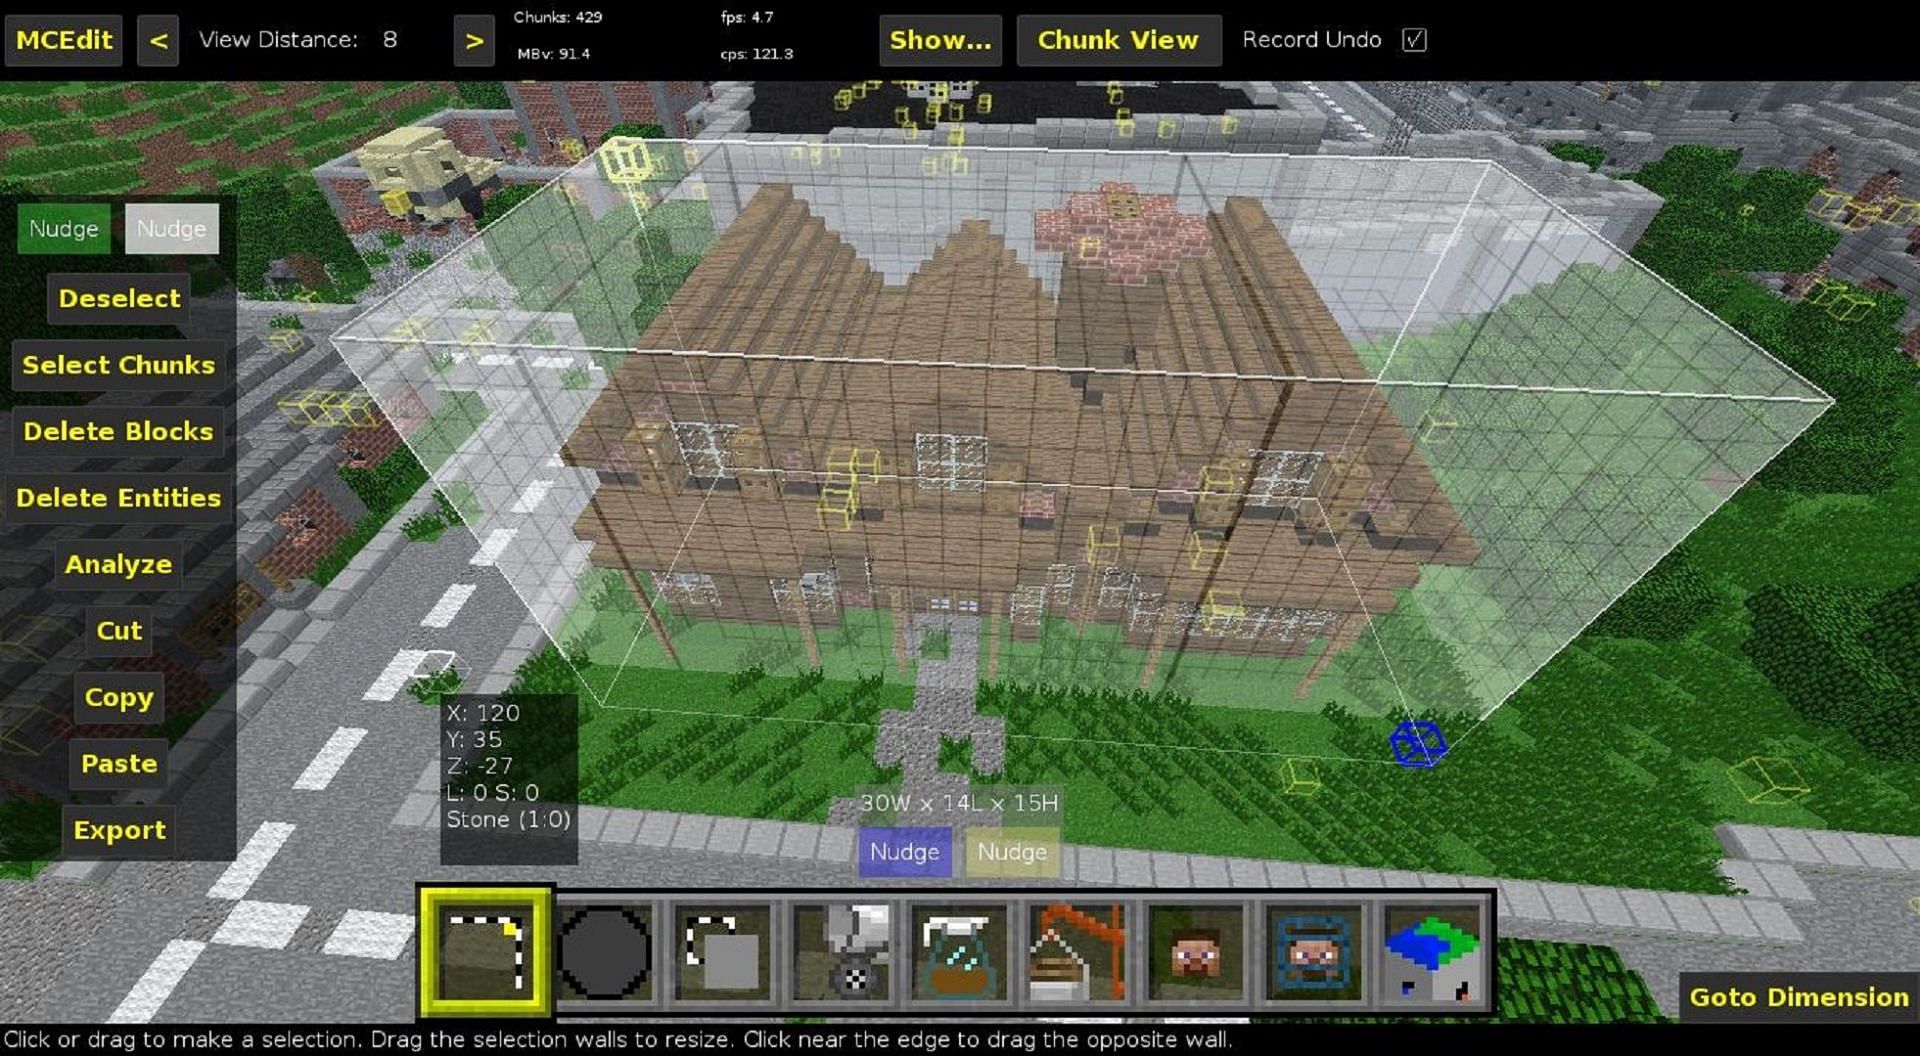 A structure schematic being placed in the Minecraft program MCedit (Image via Minetest Forums)